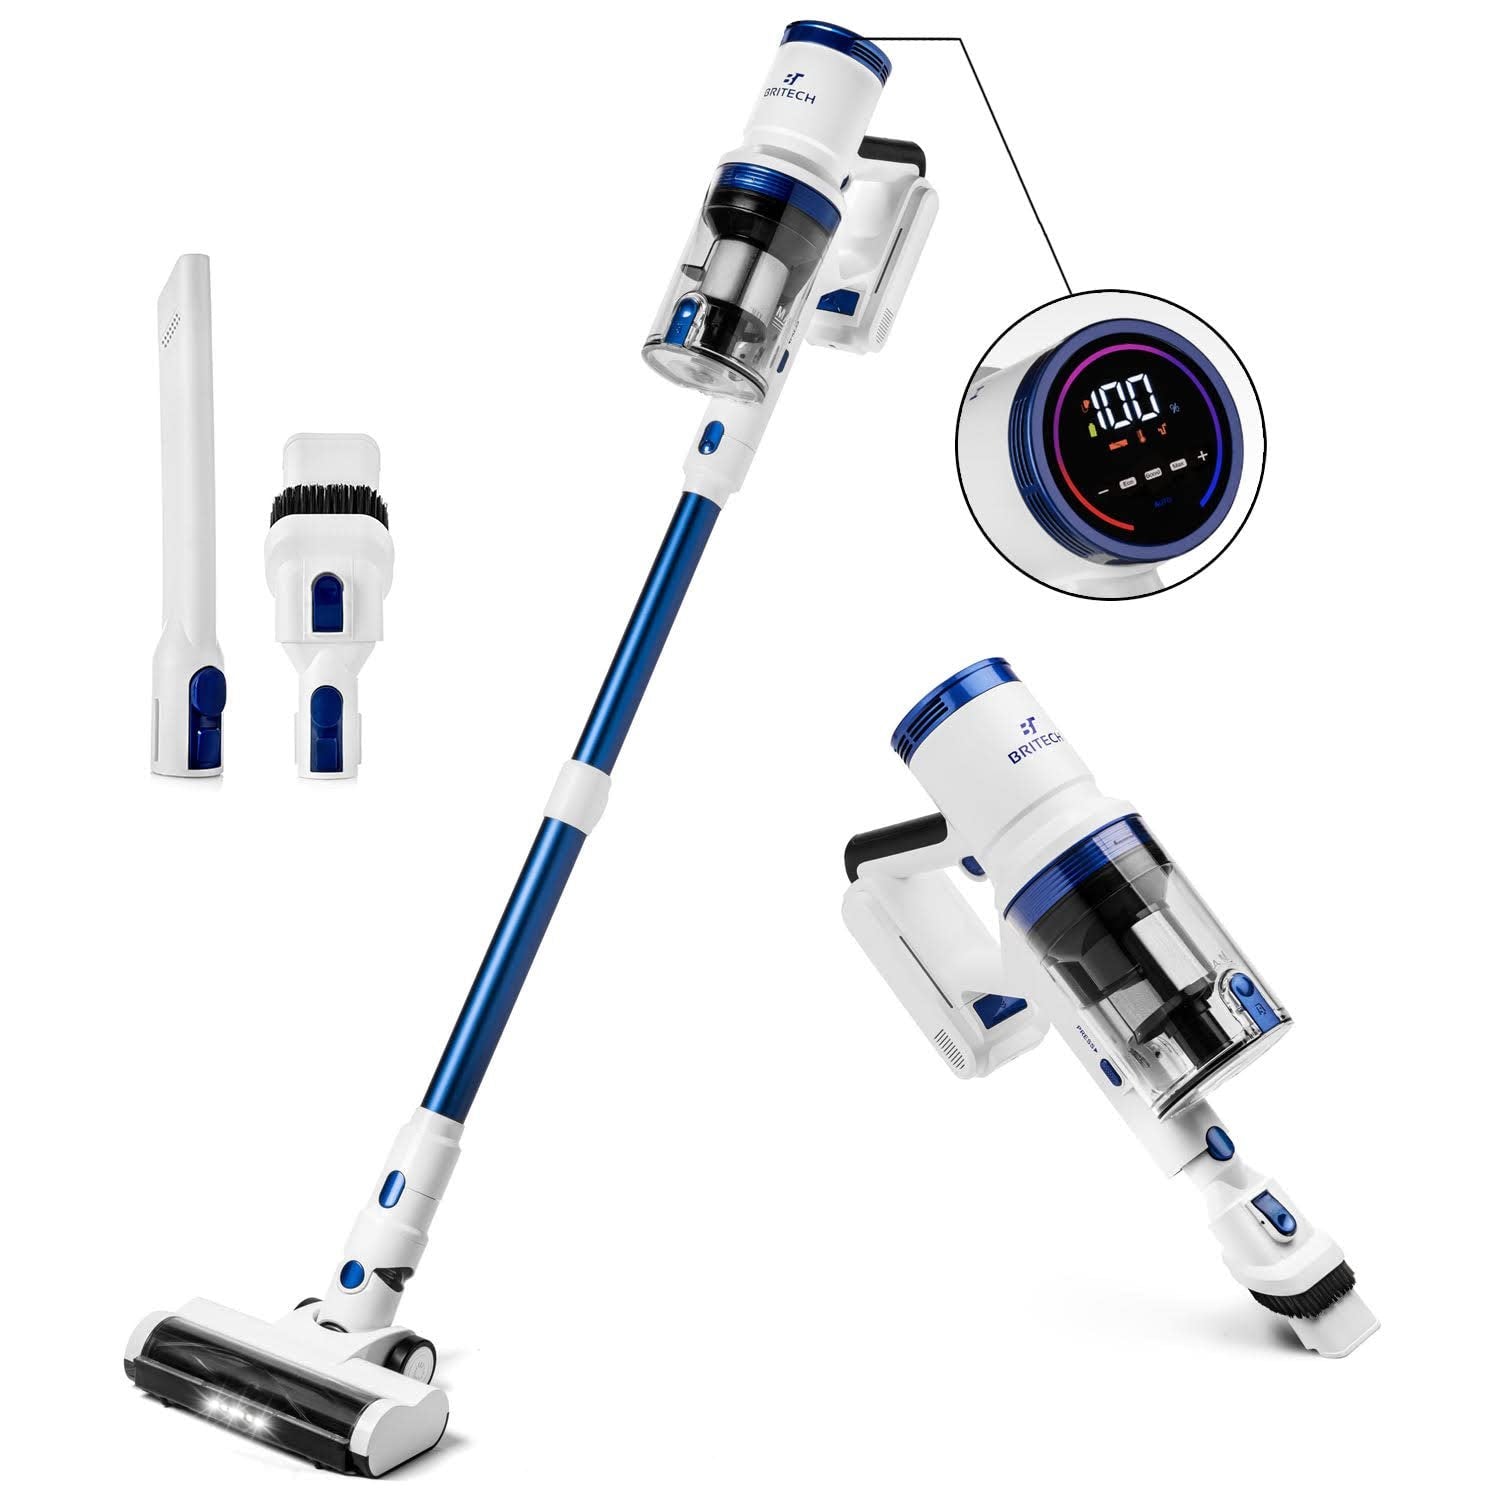 BRITECH Cordless Lightweight Stick Vacuum Cleaner, 300W Motor for Powerful Suction 40min Runtime, LED Display Screen & Headlights, Great for Carpet Cleaner, Hardwood Floor & Pet Hair (Blue)